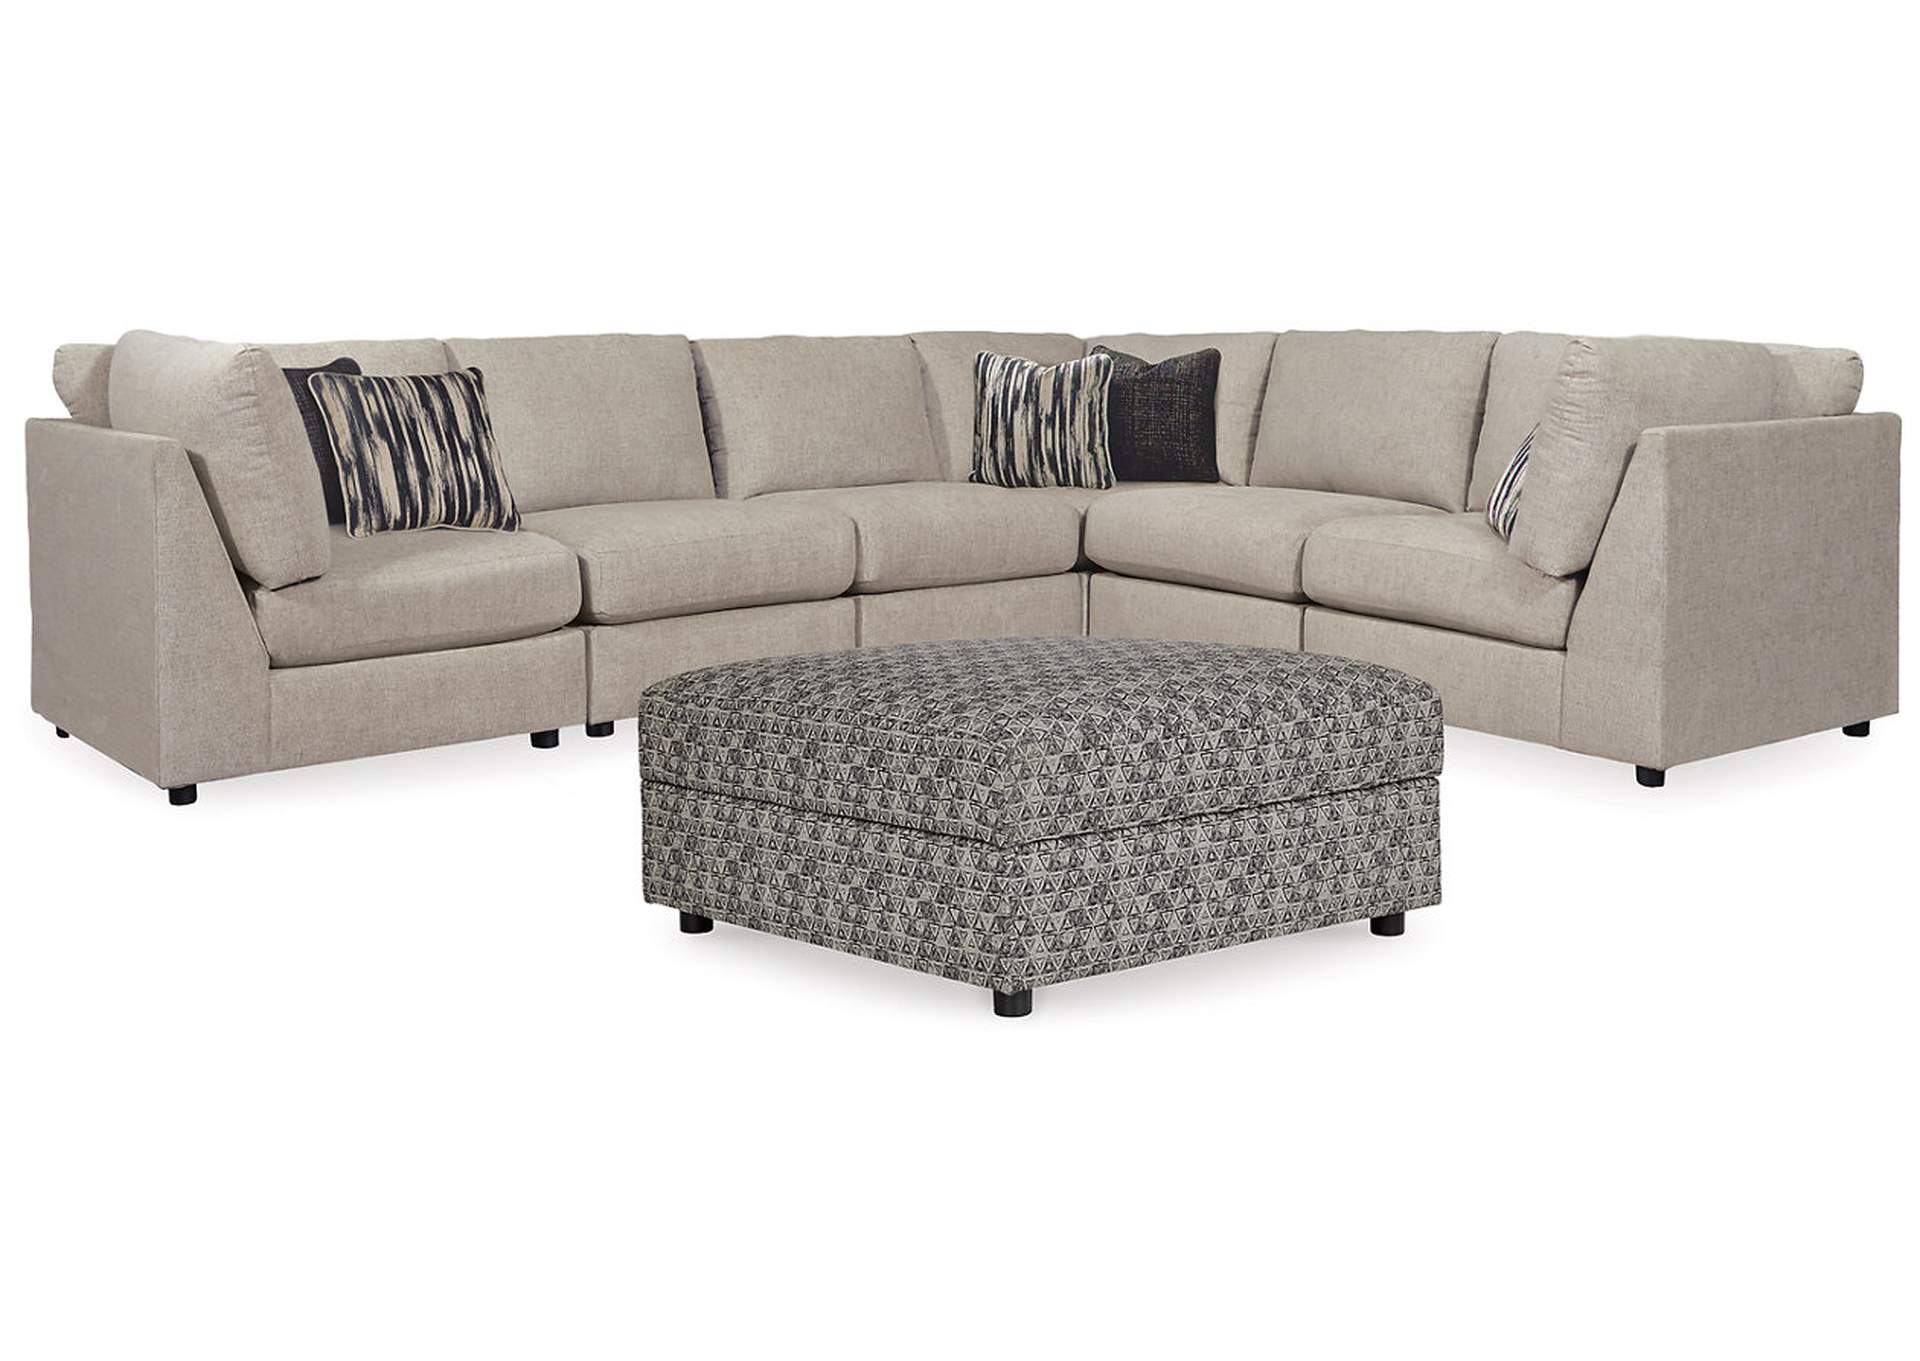 Kellway 6-Piece Sectional with Ottoman,Signature Design By Ashley